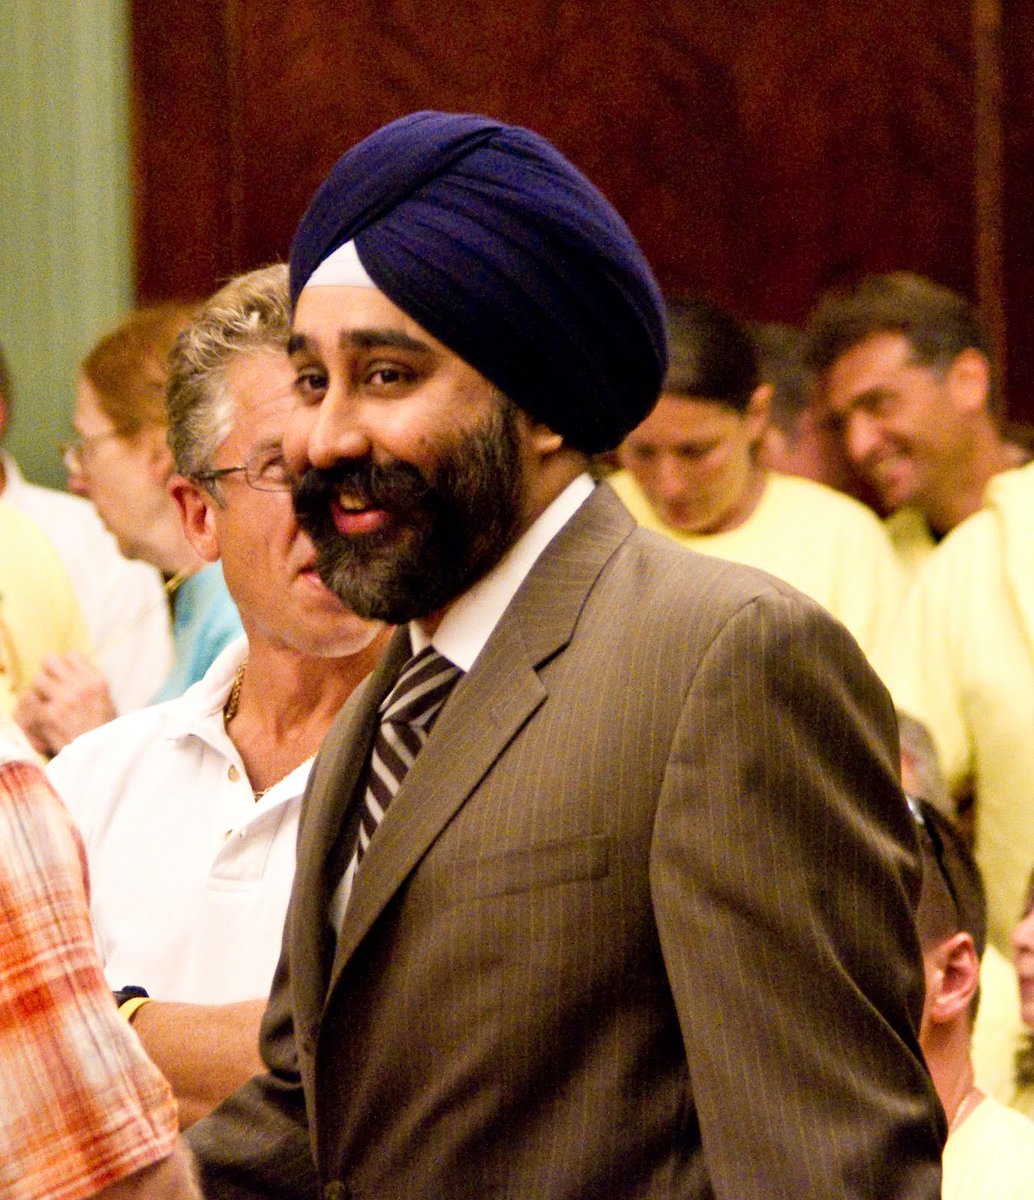 The night of magic continues. Ravi Bhalla - a brilliant and progressive candidate - just became the first Sikh to be elected mayor of a major US city. Congratulations, @RaviBhalla!!!